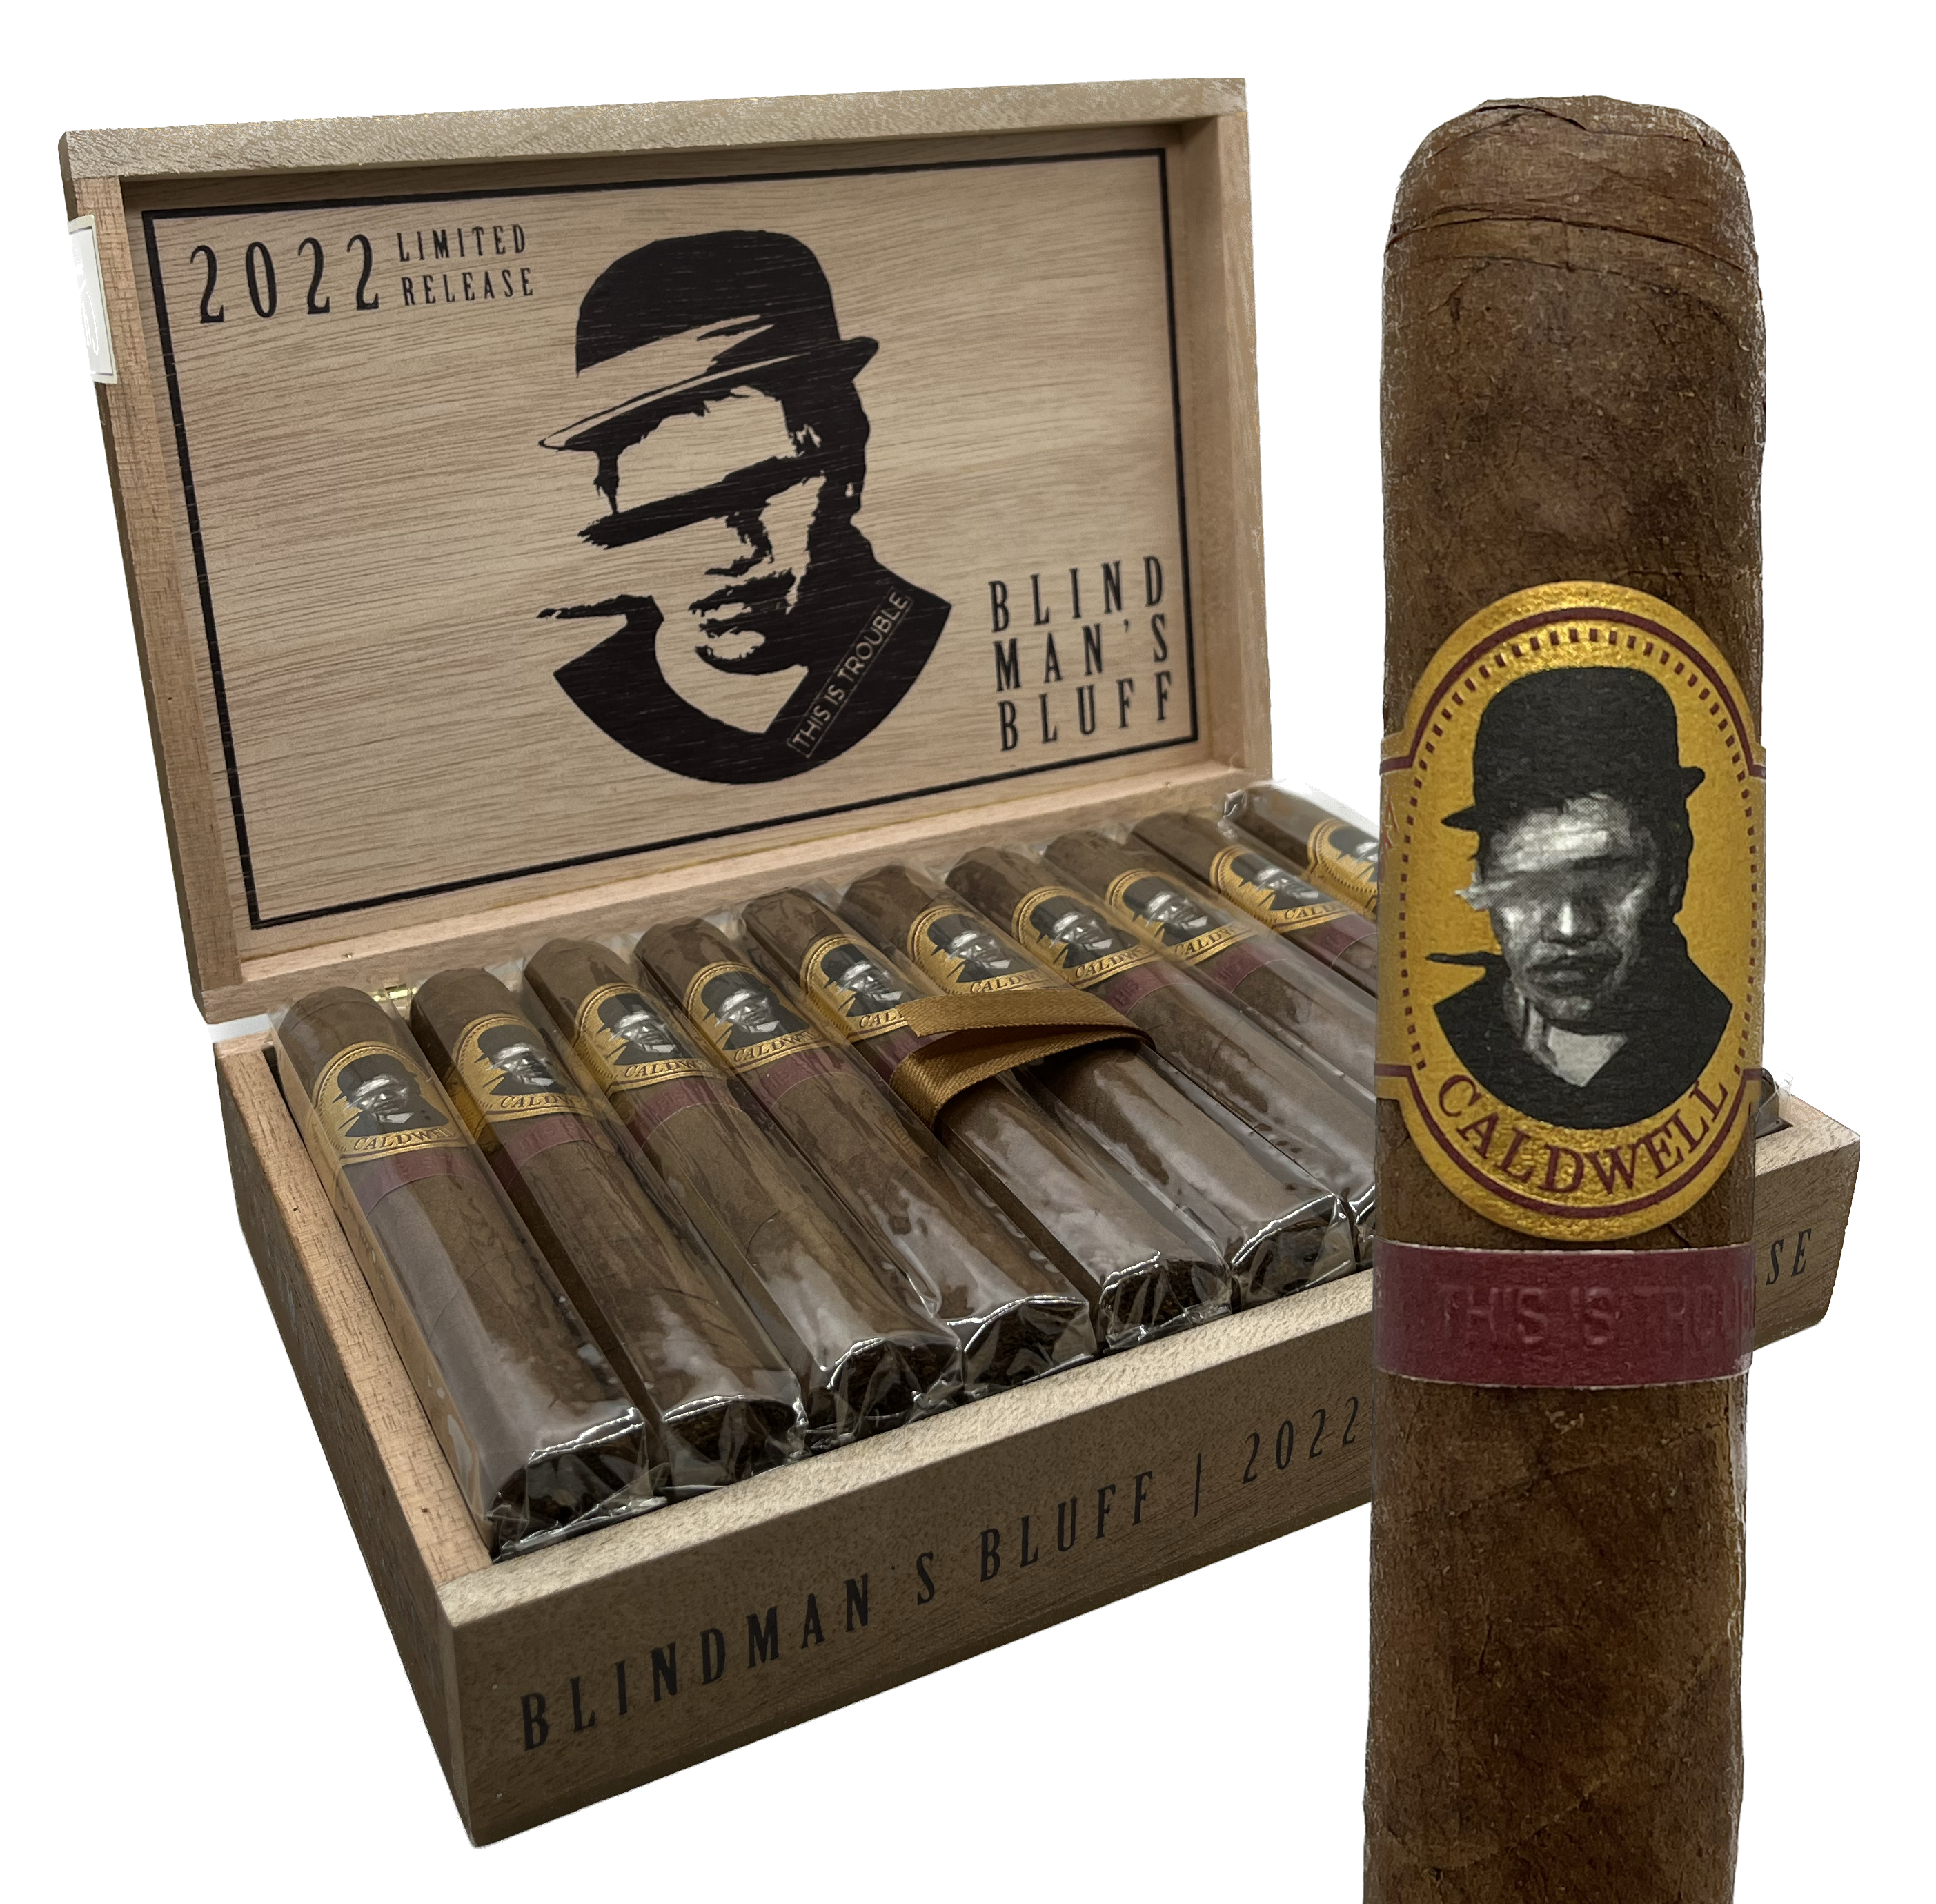 Caldwell Blind Man's Bluff Limited Edition